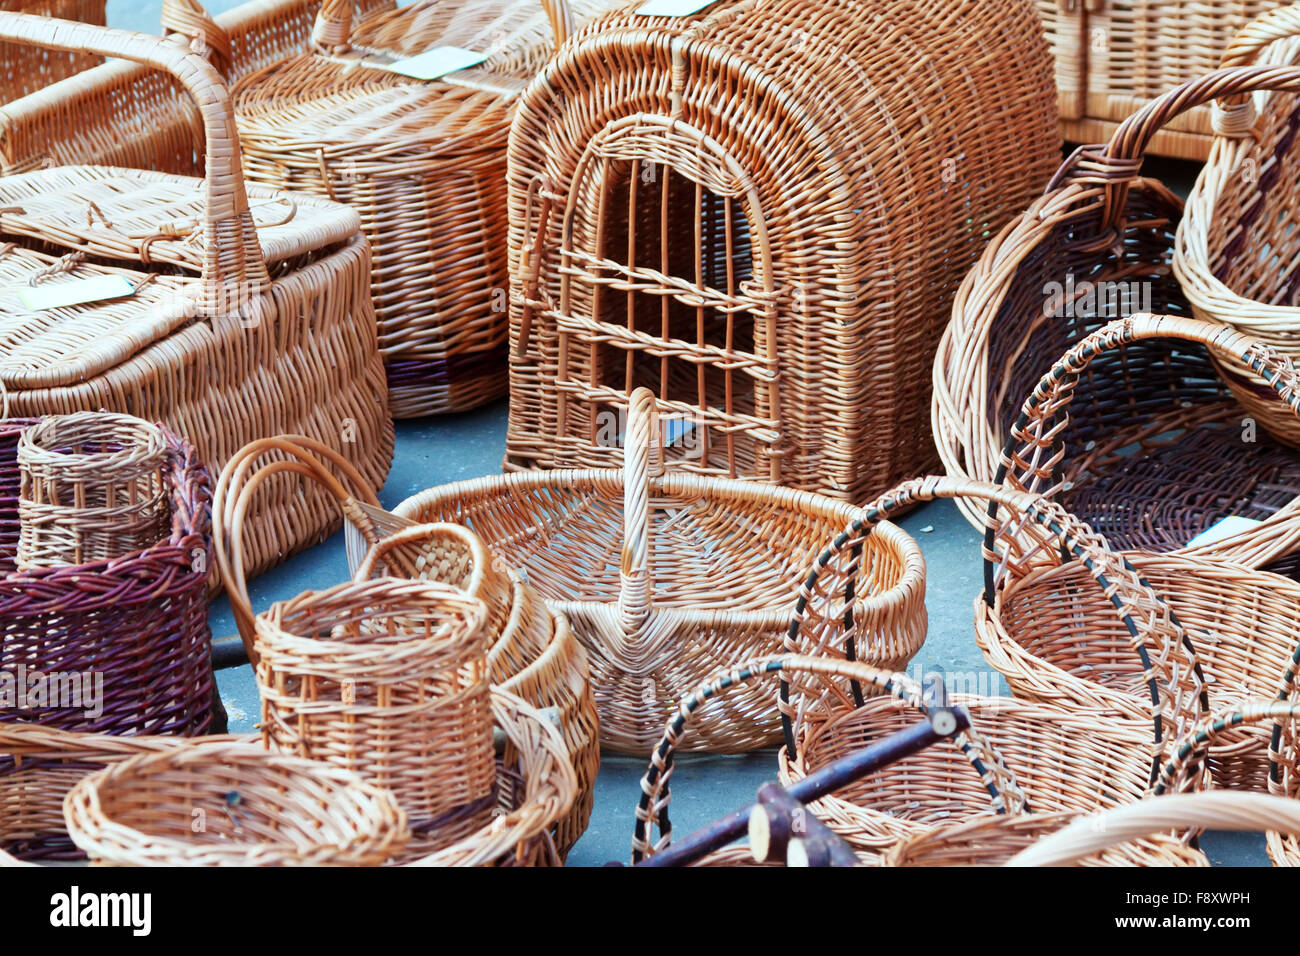 wicker baskets for sale at  market Stock Photo